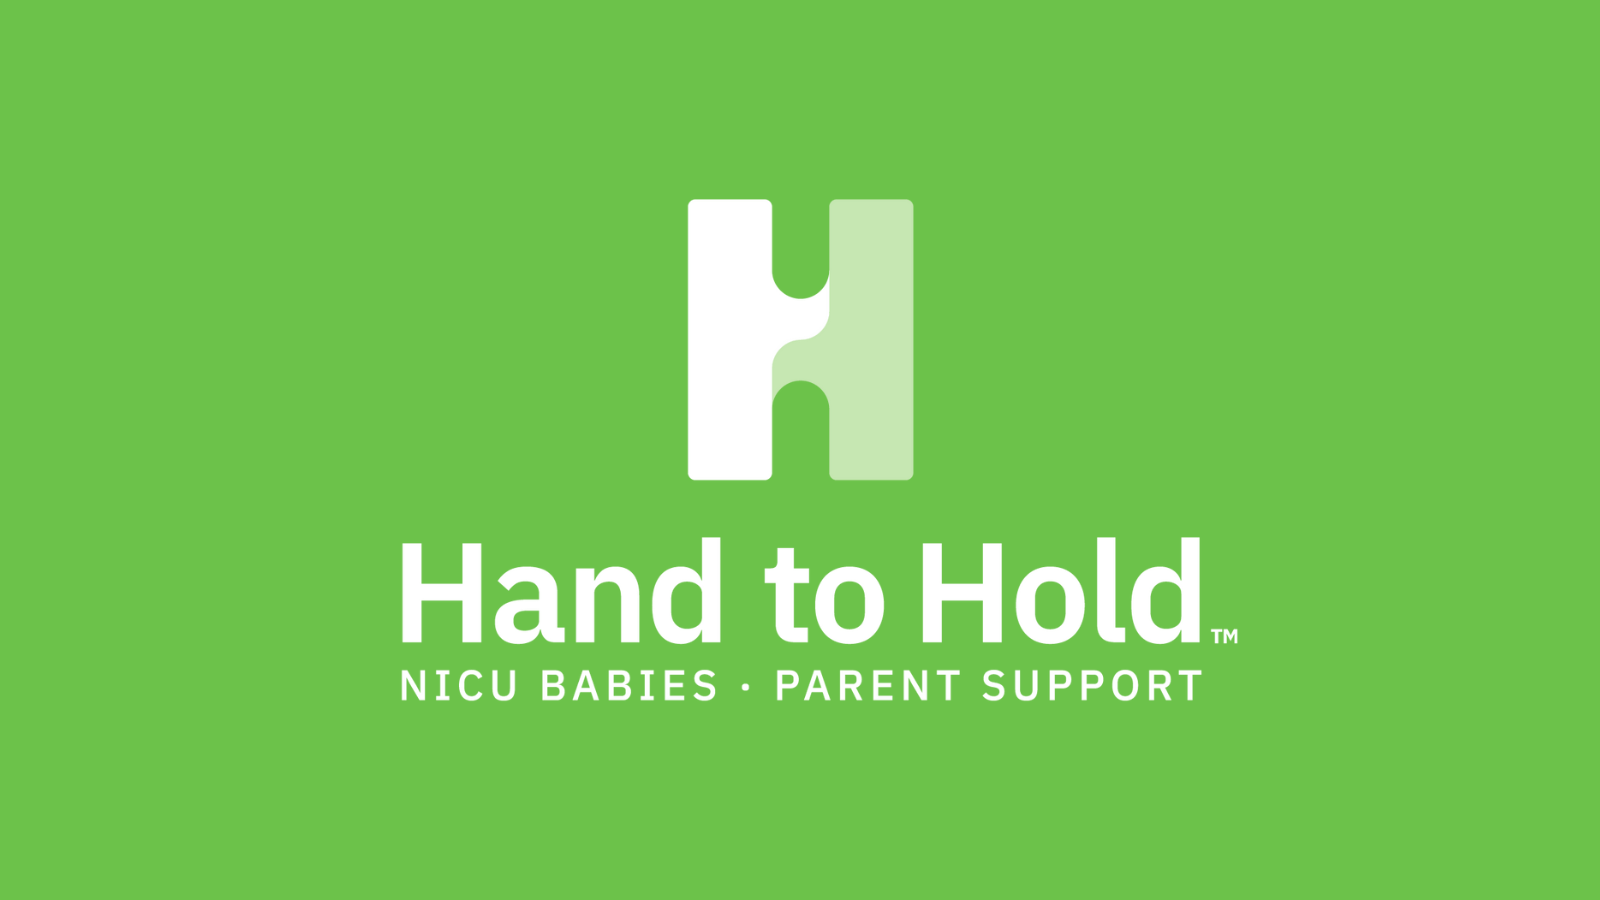 Hand to Hold, NEC